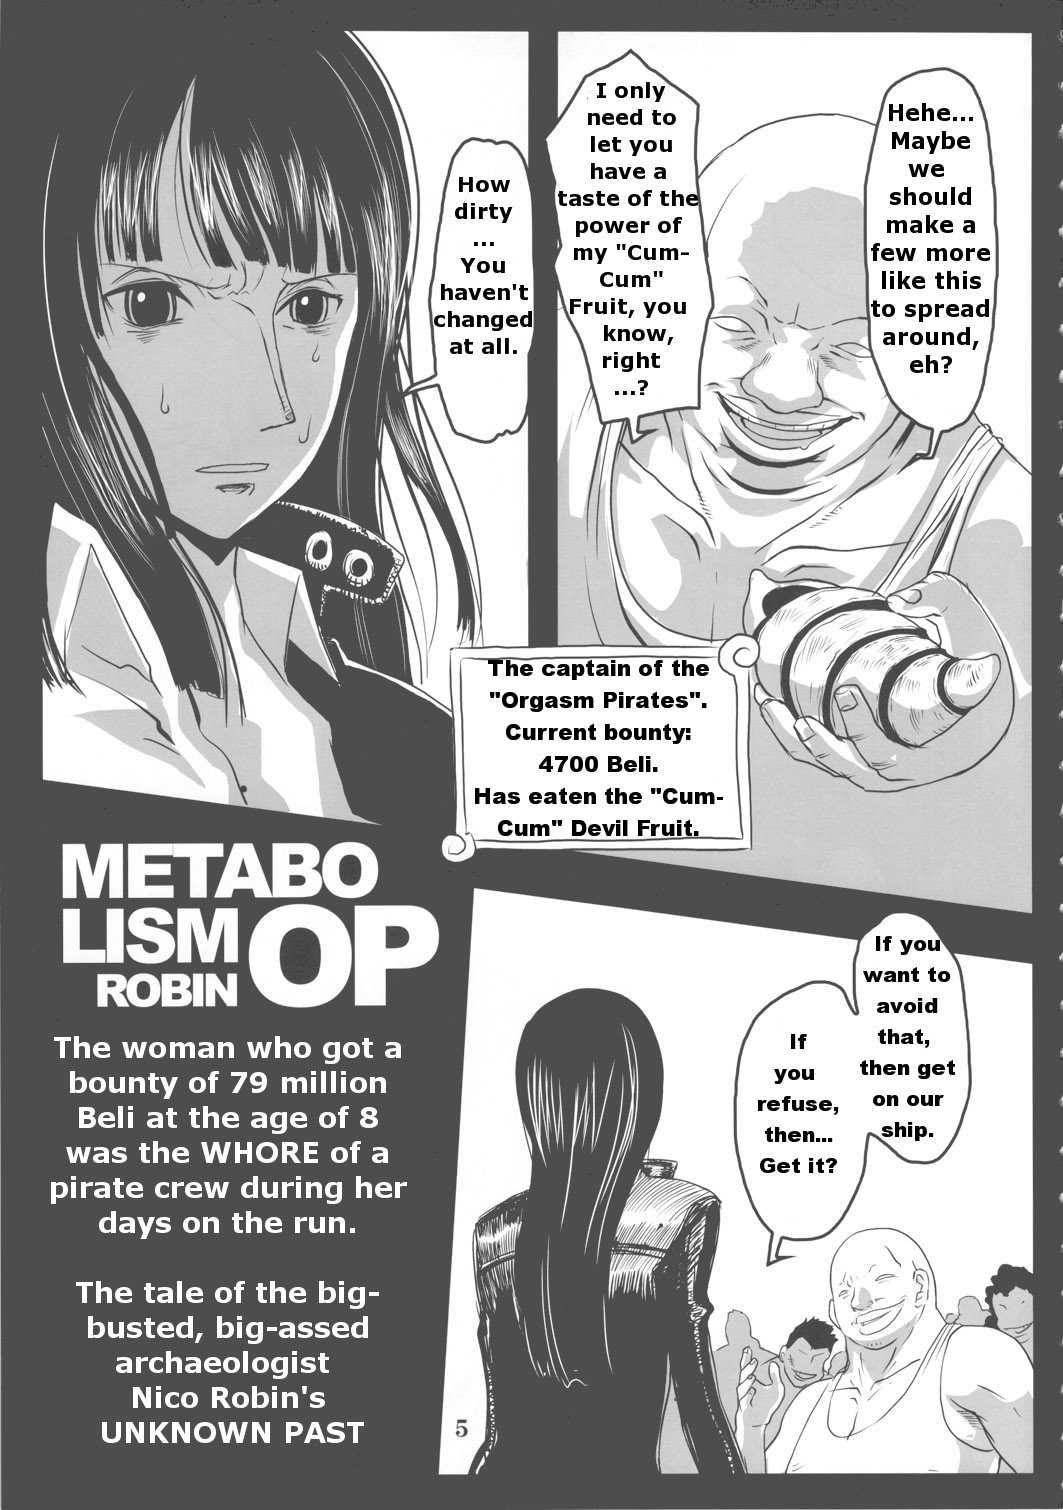 (C78) [8graphica (Yoshitama Ichirou)] Metabolism-OP - The tale of the big-busted, big-assed archaeologist Nico Robin&#039;s UNKNOWN PAST (One Piece) [English] (C78) (同人誌) [エイトグラフィカ (吉玉一楼)] メタボリズムOP 巨乳巨尻娼婦ニコロビンの消したい過去 (ワンピース)